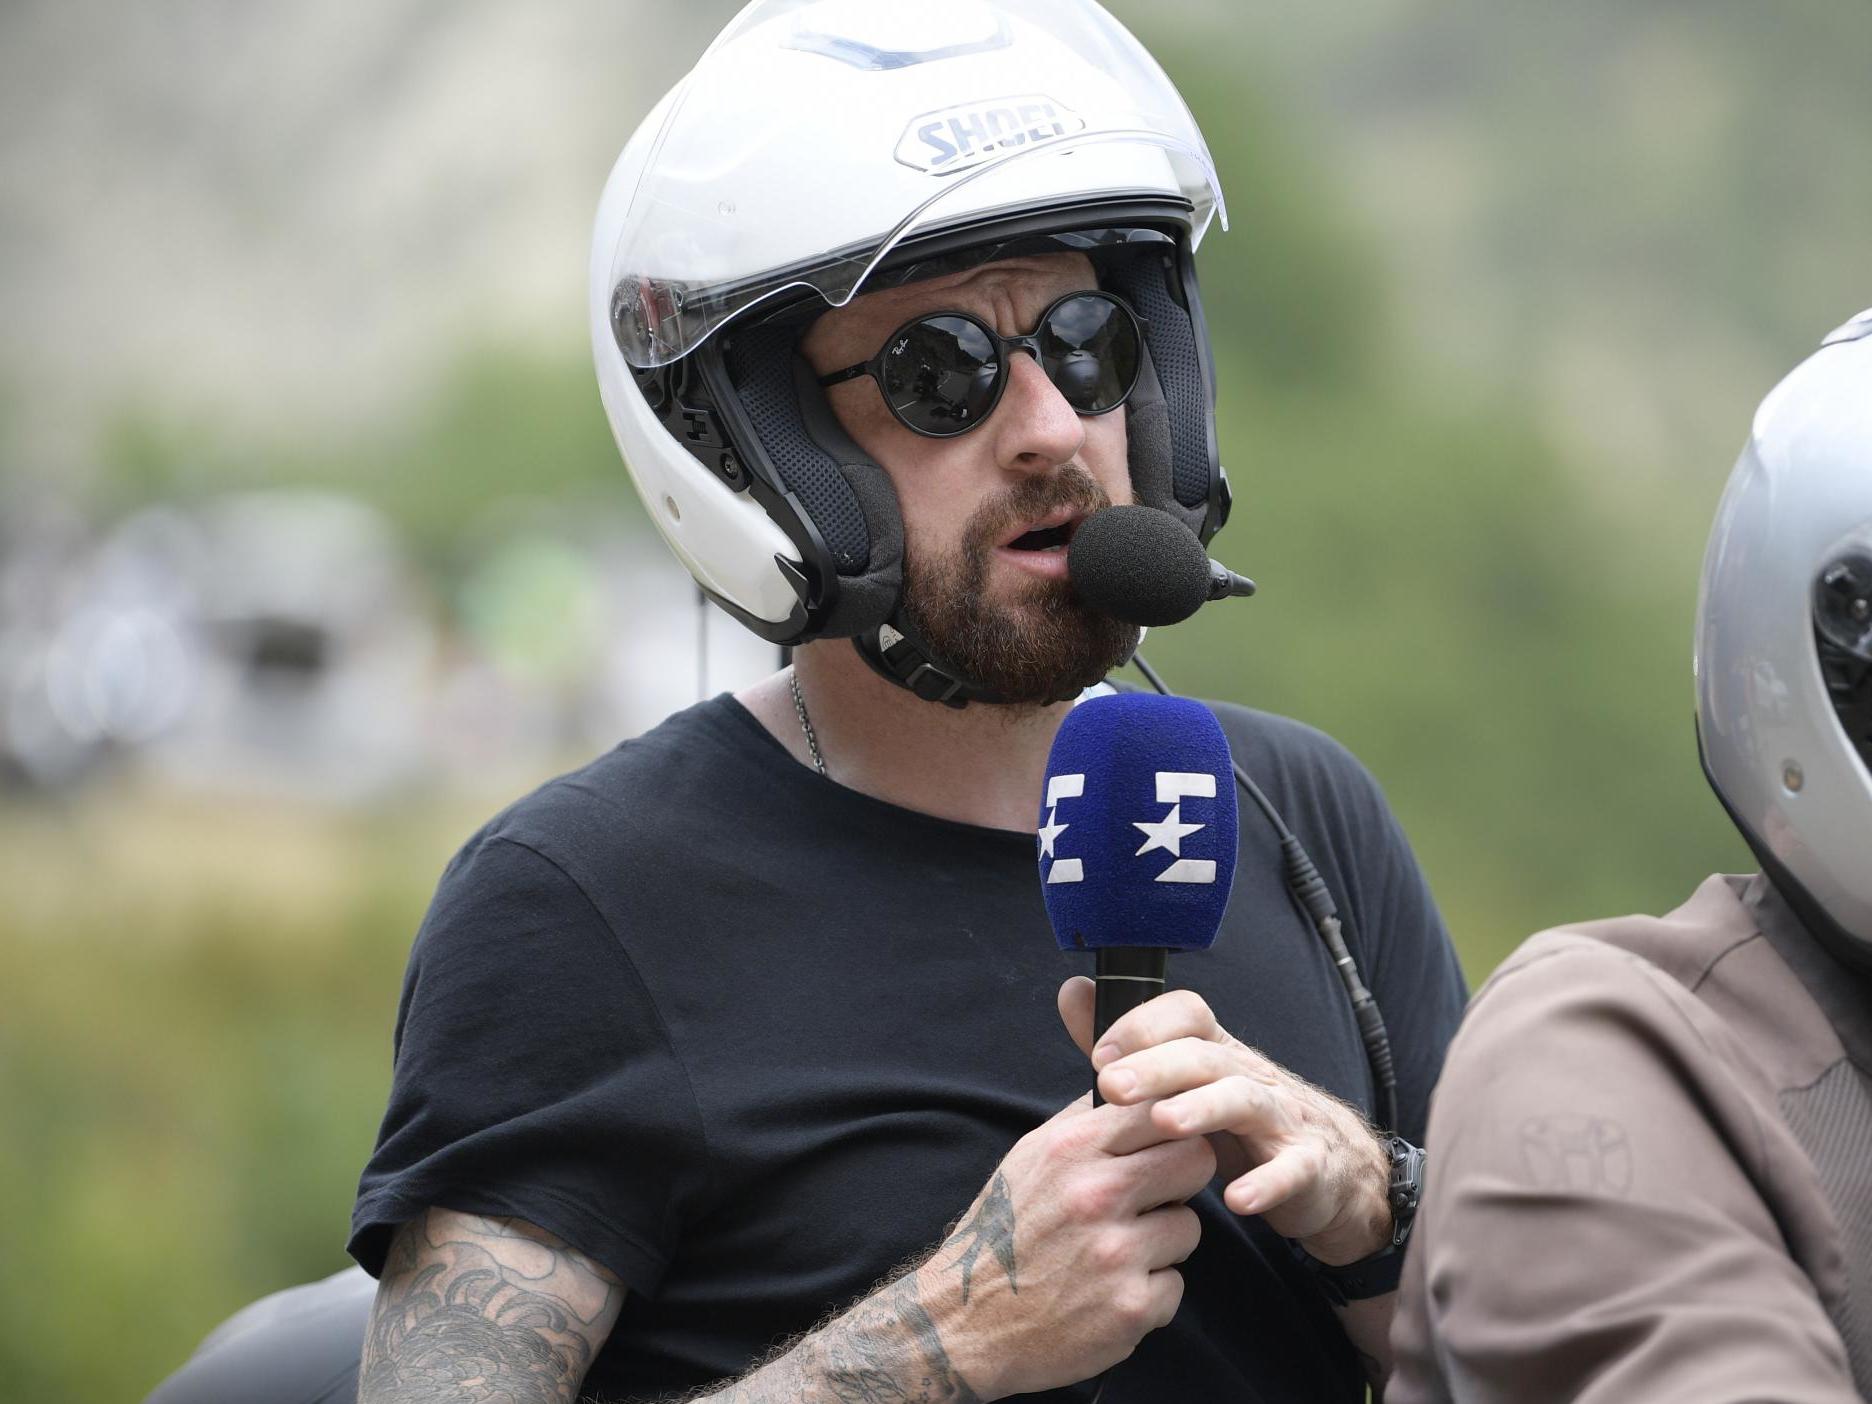 Sir Bradley Wiggins was critical of the UCI's response to the crash